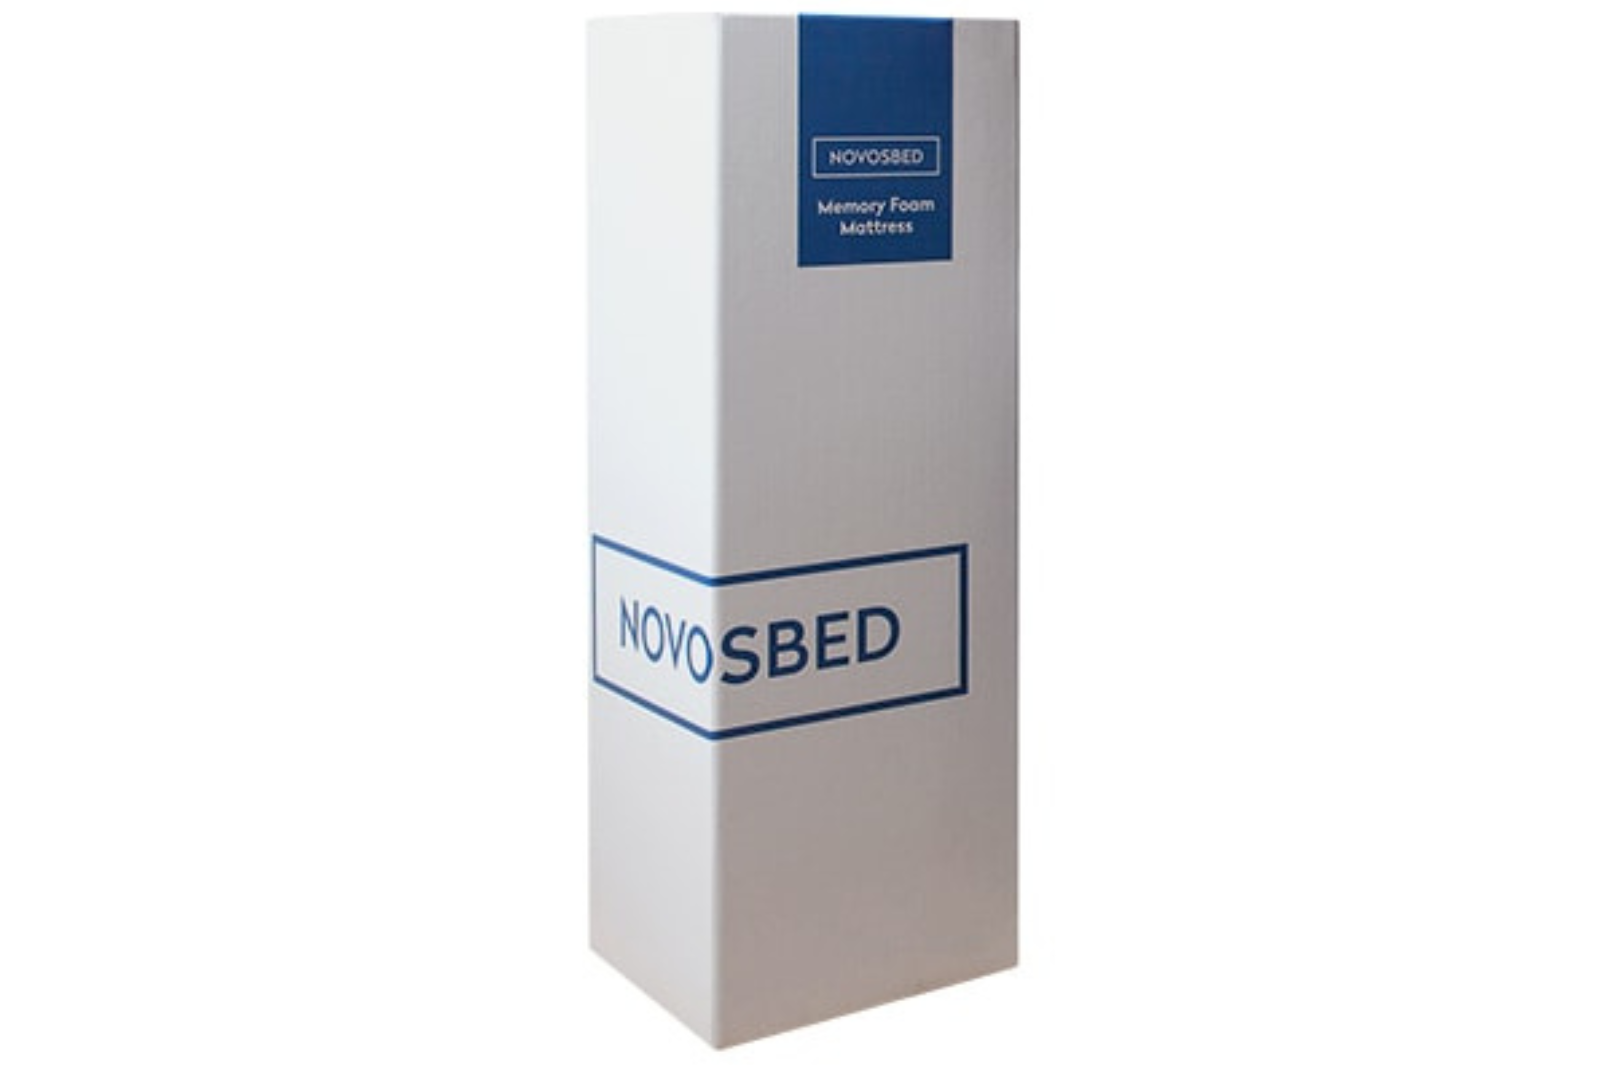 Photo of the Novosbed Mattress box on the floor in a bedroom taken from a front angle.